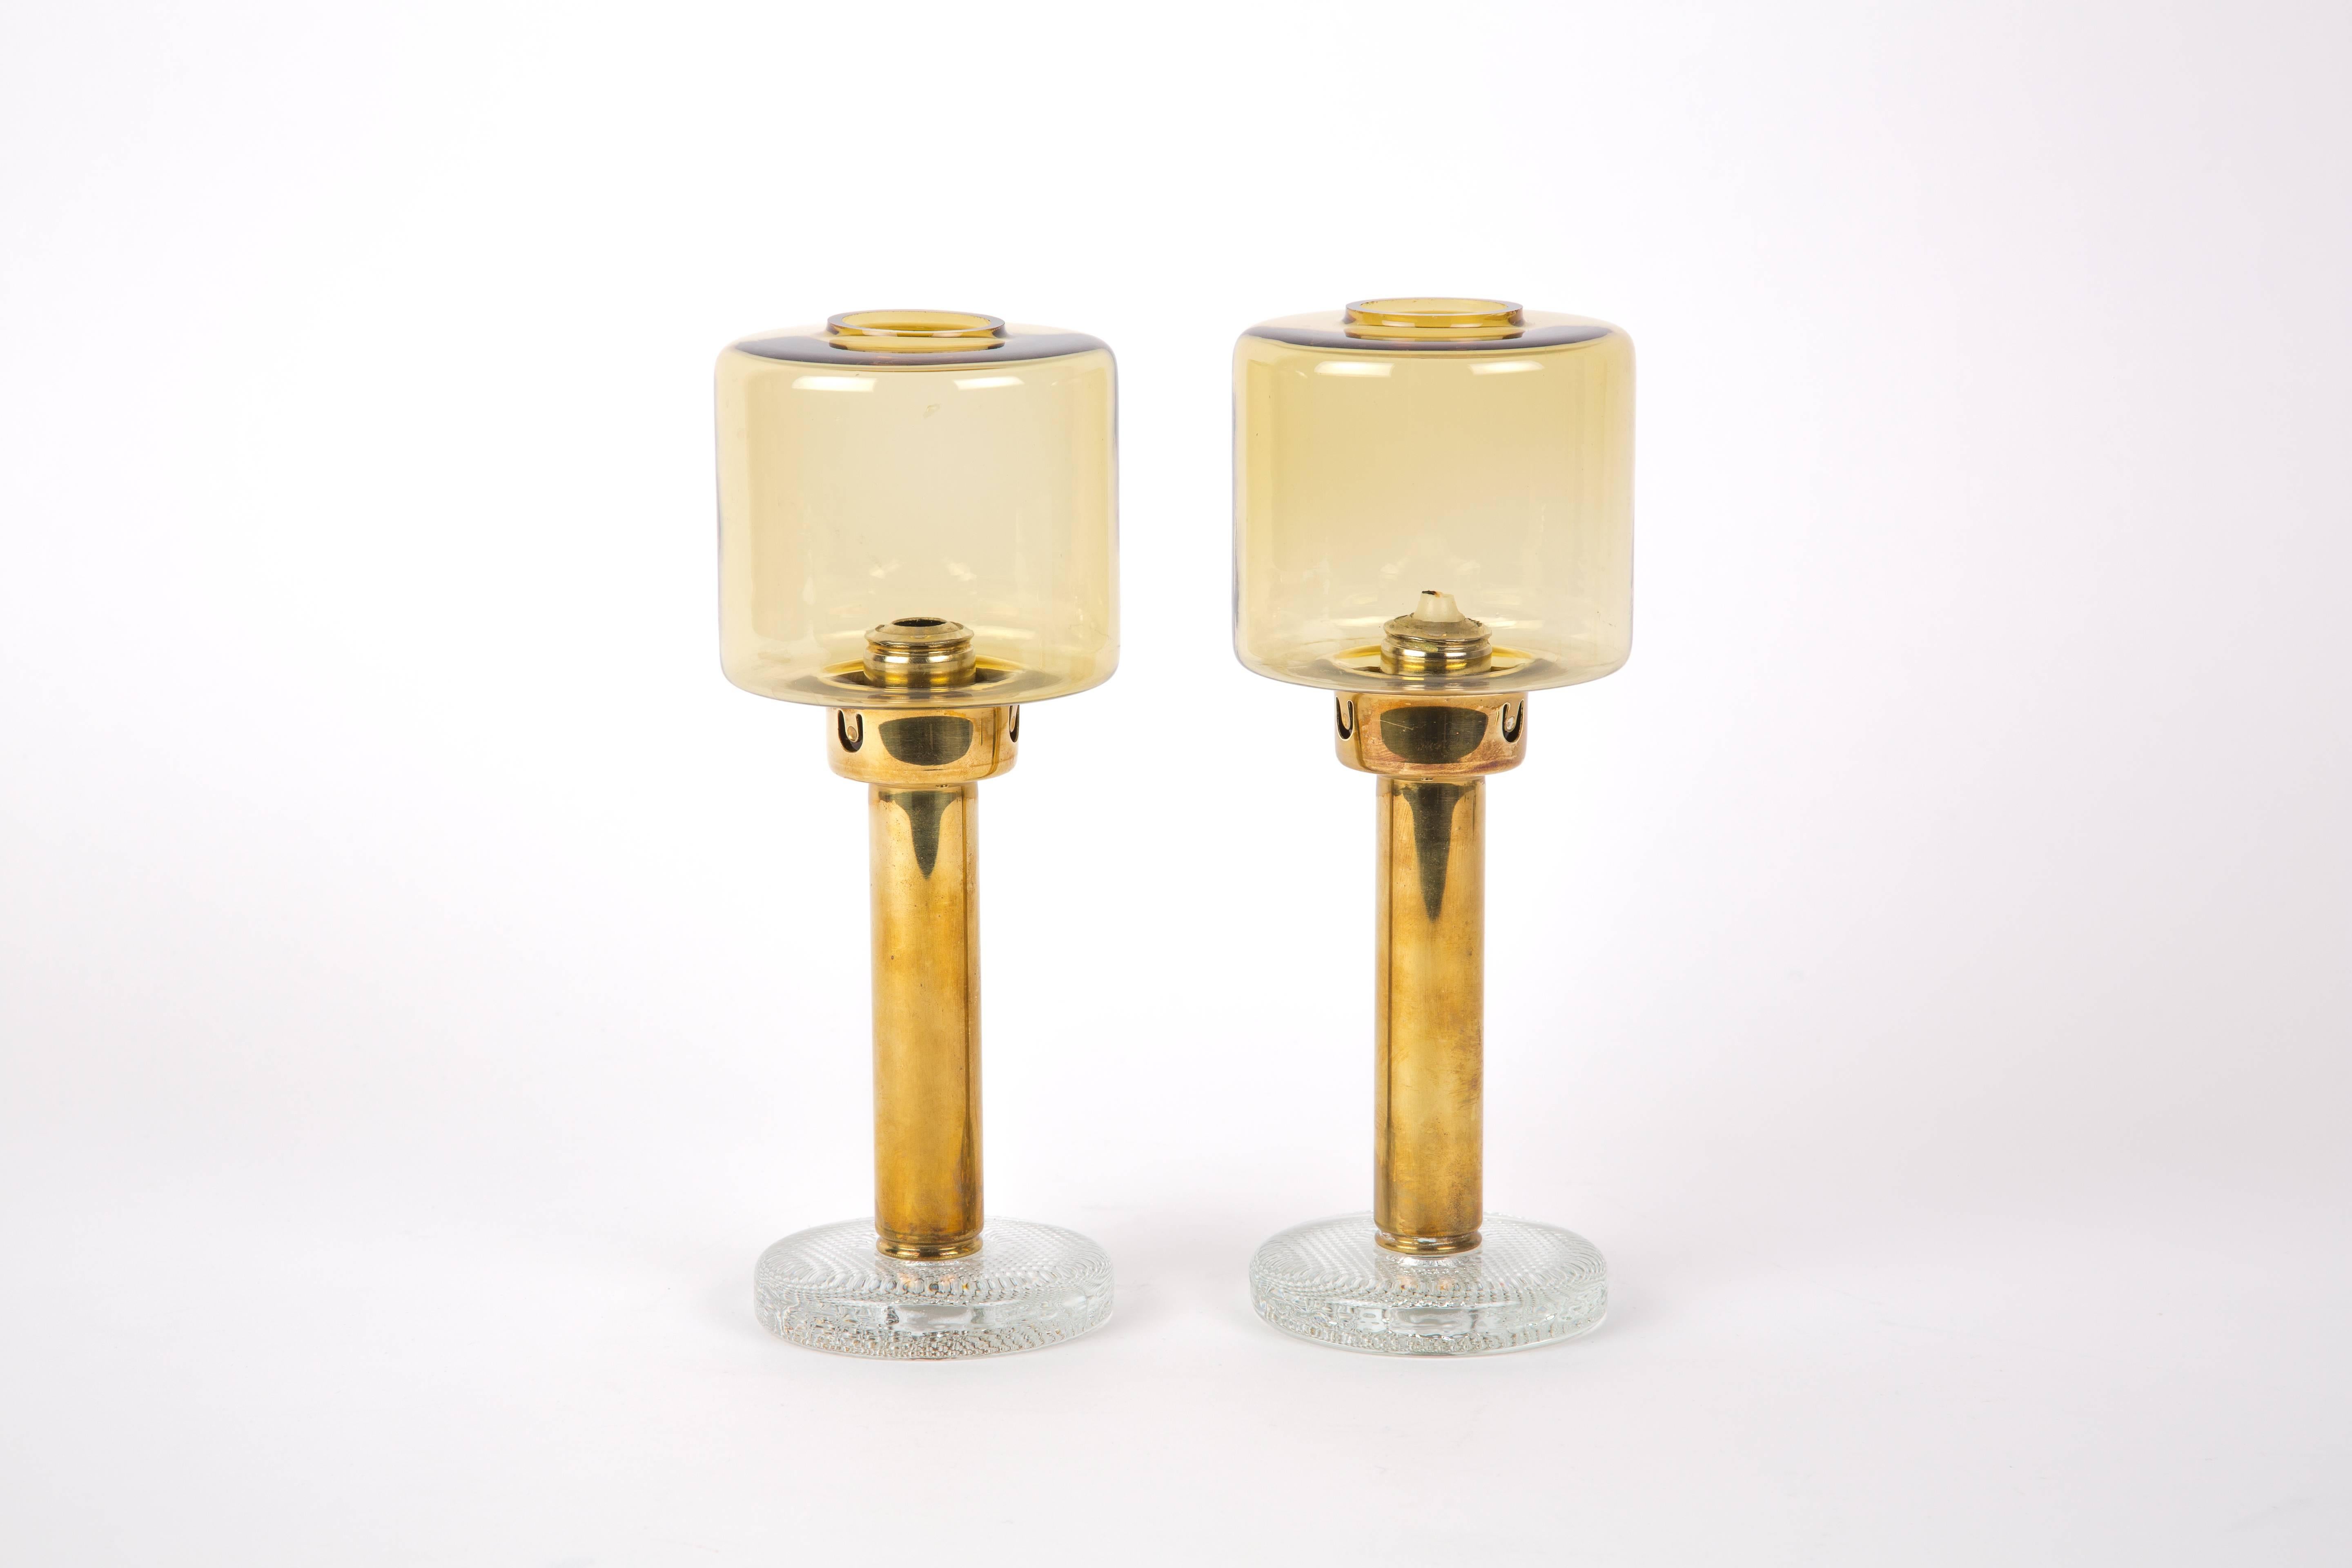 Hans Agne Jakobsson. A set of two brass candleholders with glass base by Hans-Agne Jakobsson for Markaryd, Sweden. The base is of glass with little air bubbles in it. String system for the candle.
Measures: The base is 10 cm, the height is 27 cm.